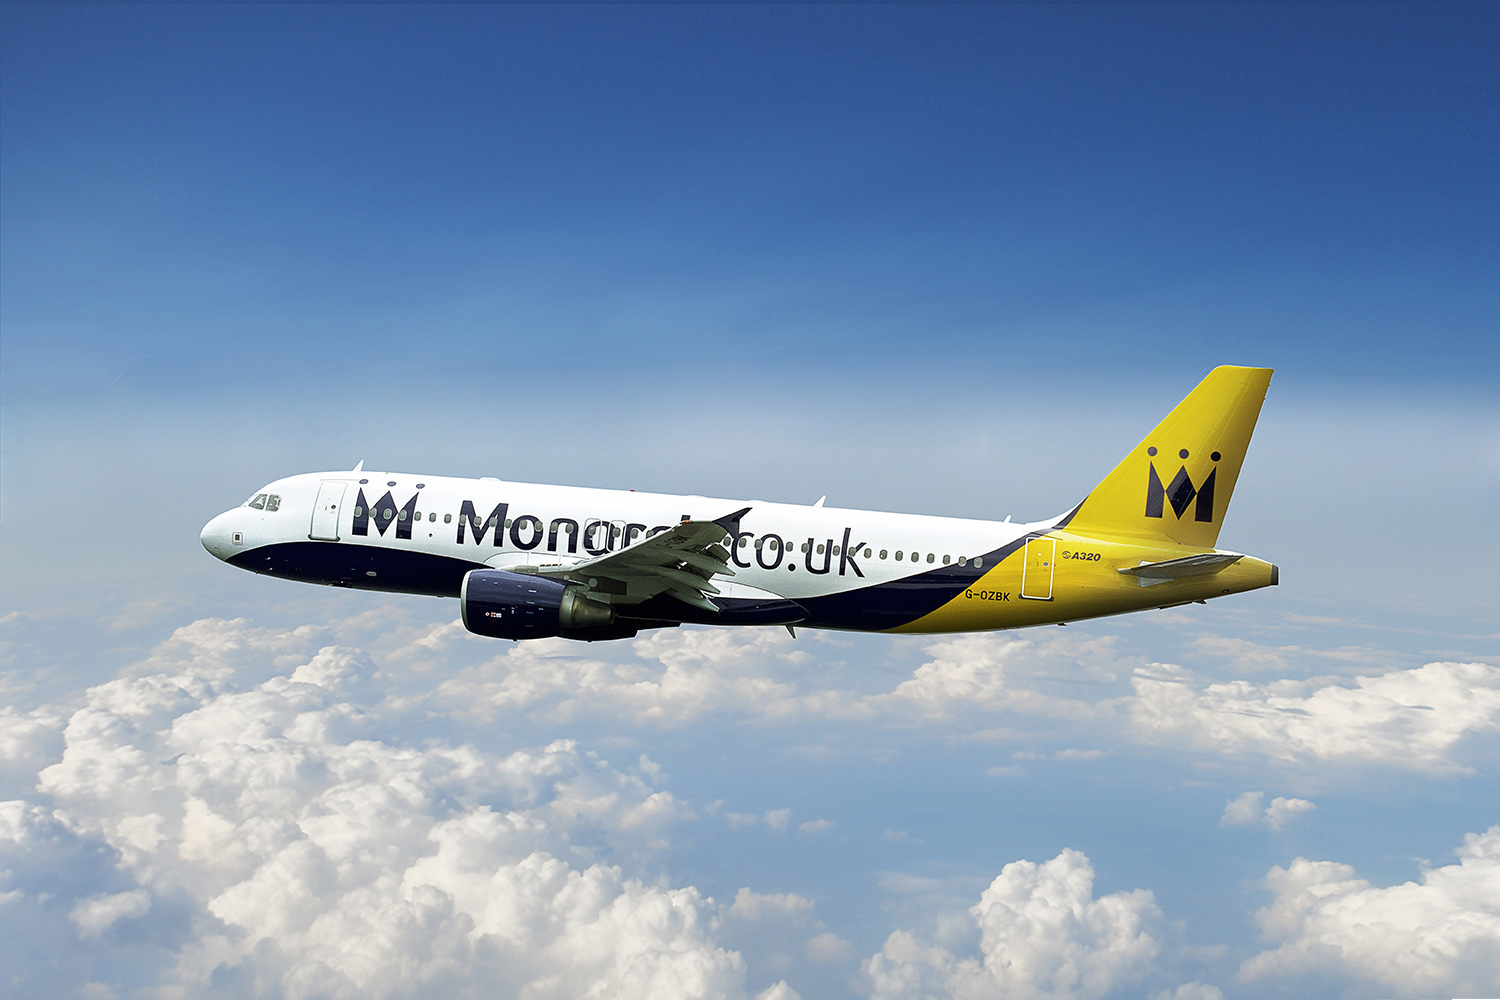 Monarch is going all-scheduled, but don't write off charter airlines just yet